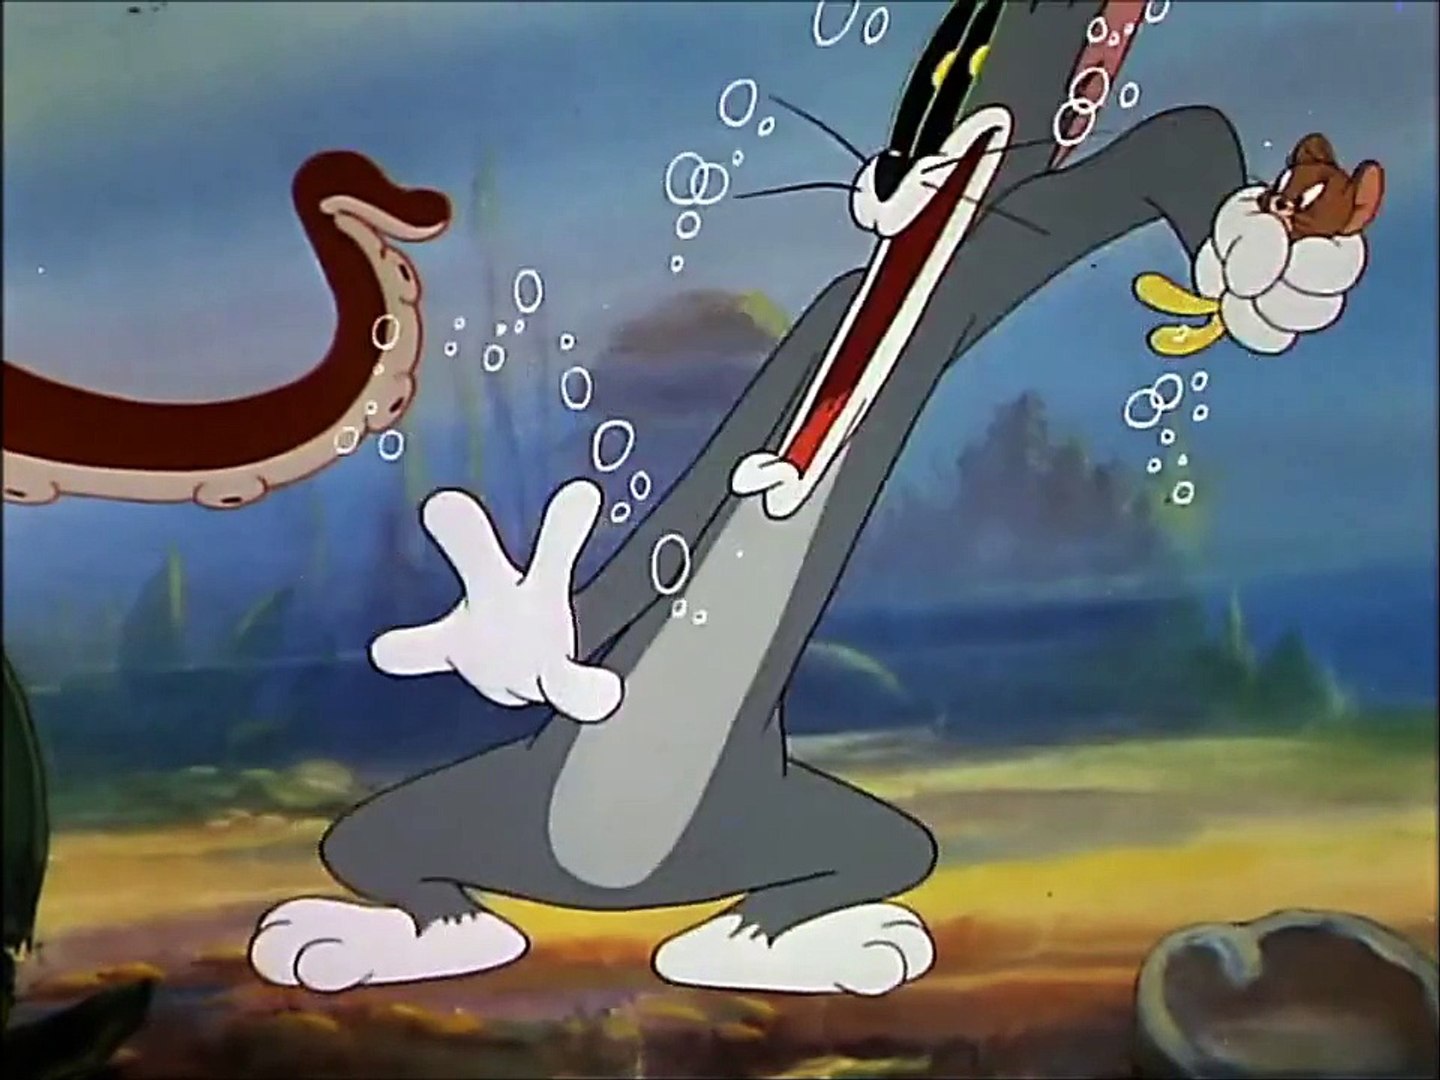 Tom and Jerry Episode 43 The Cat and the Mermouse 1949